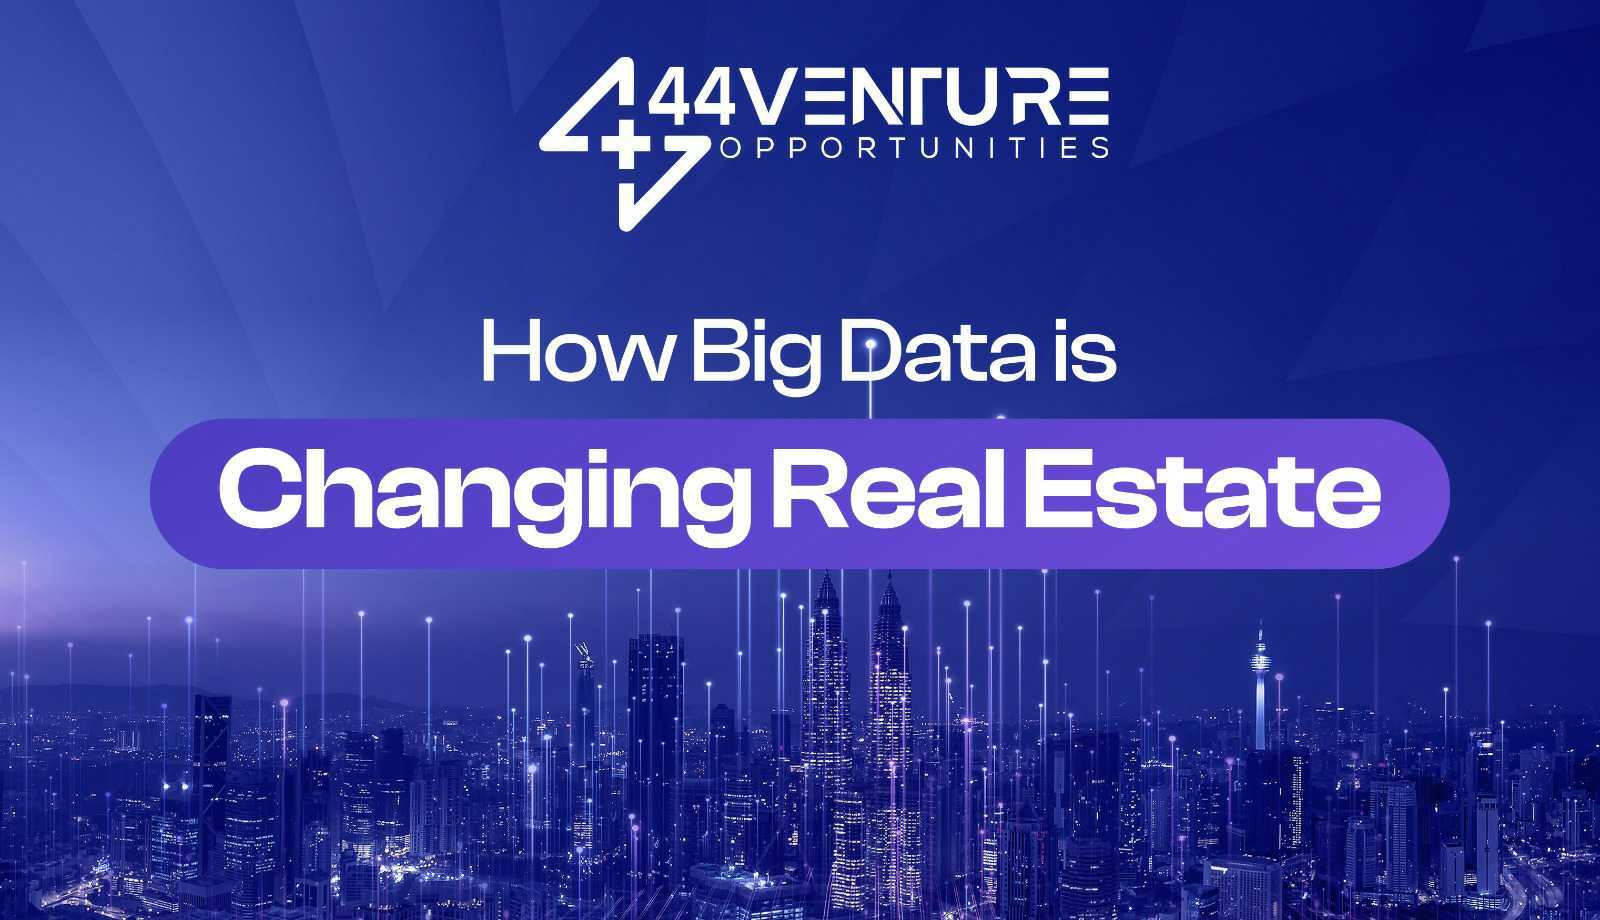 The Role Of Data Analytics In Proptech: How Big Data Is Changing Real Estate